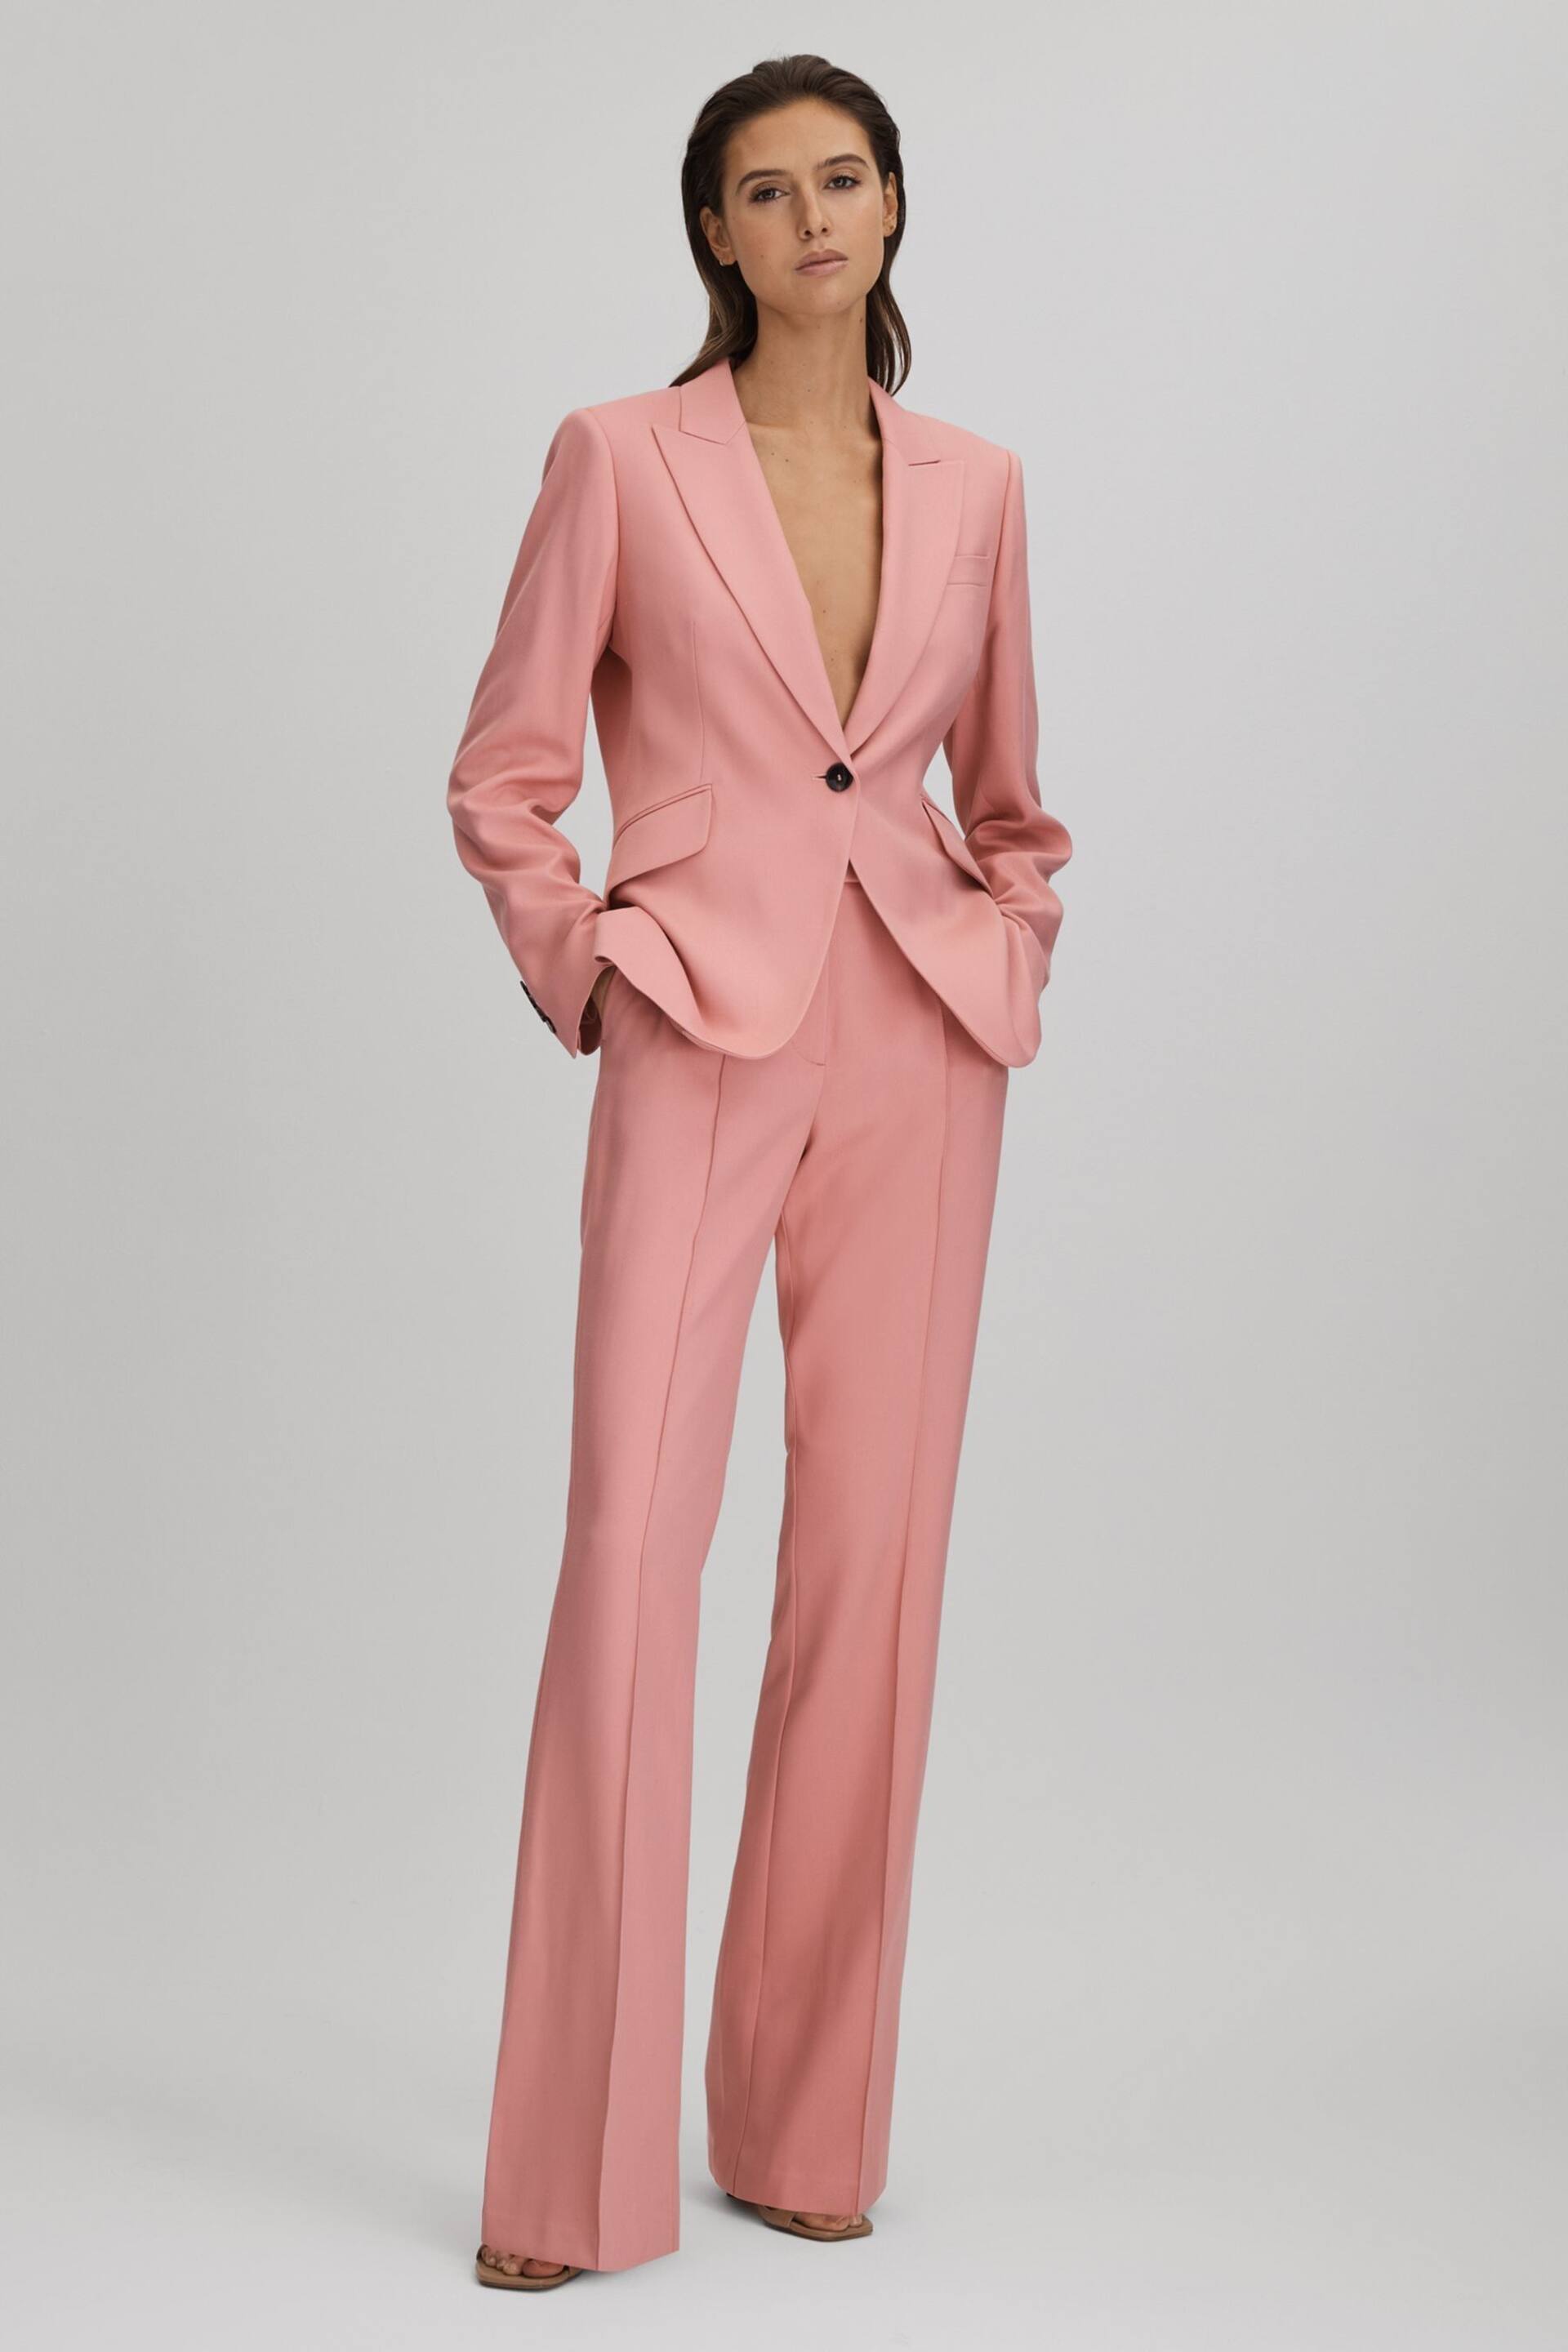 Reiss Pink Millie Tailored Single Breasted Suit Blazer - Image 3 of 7